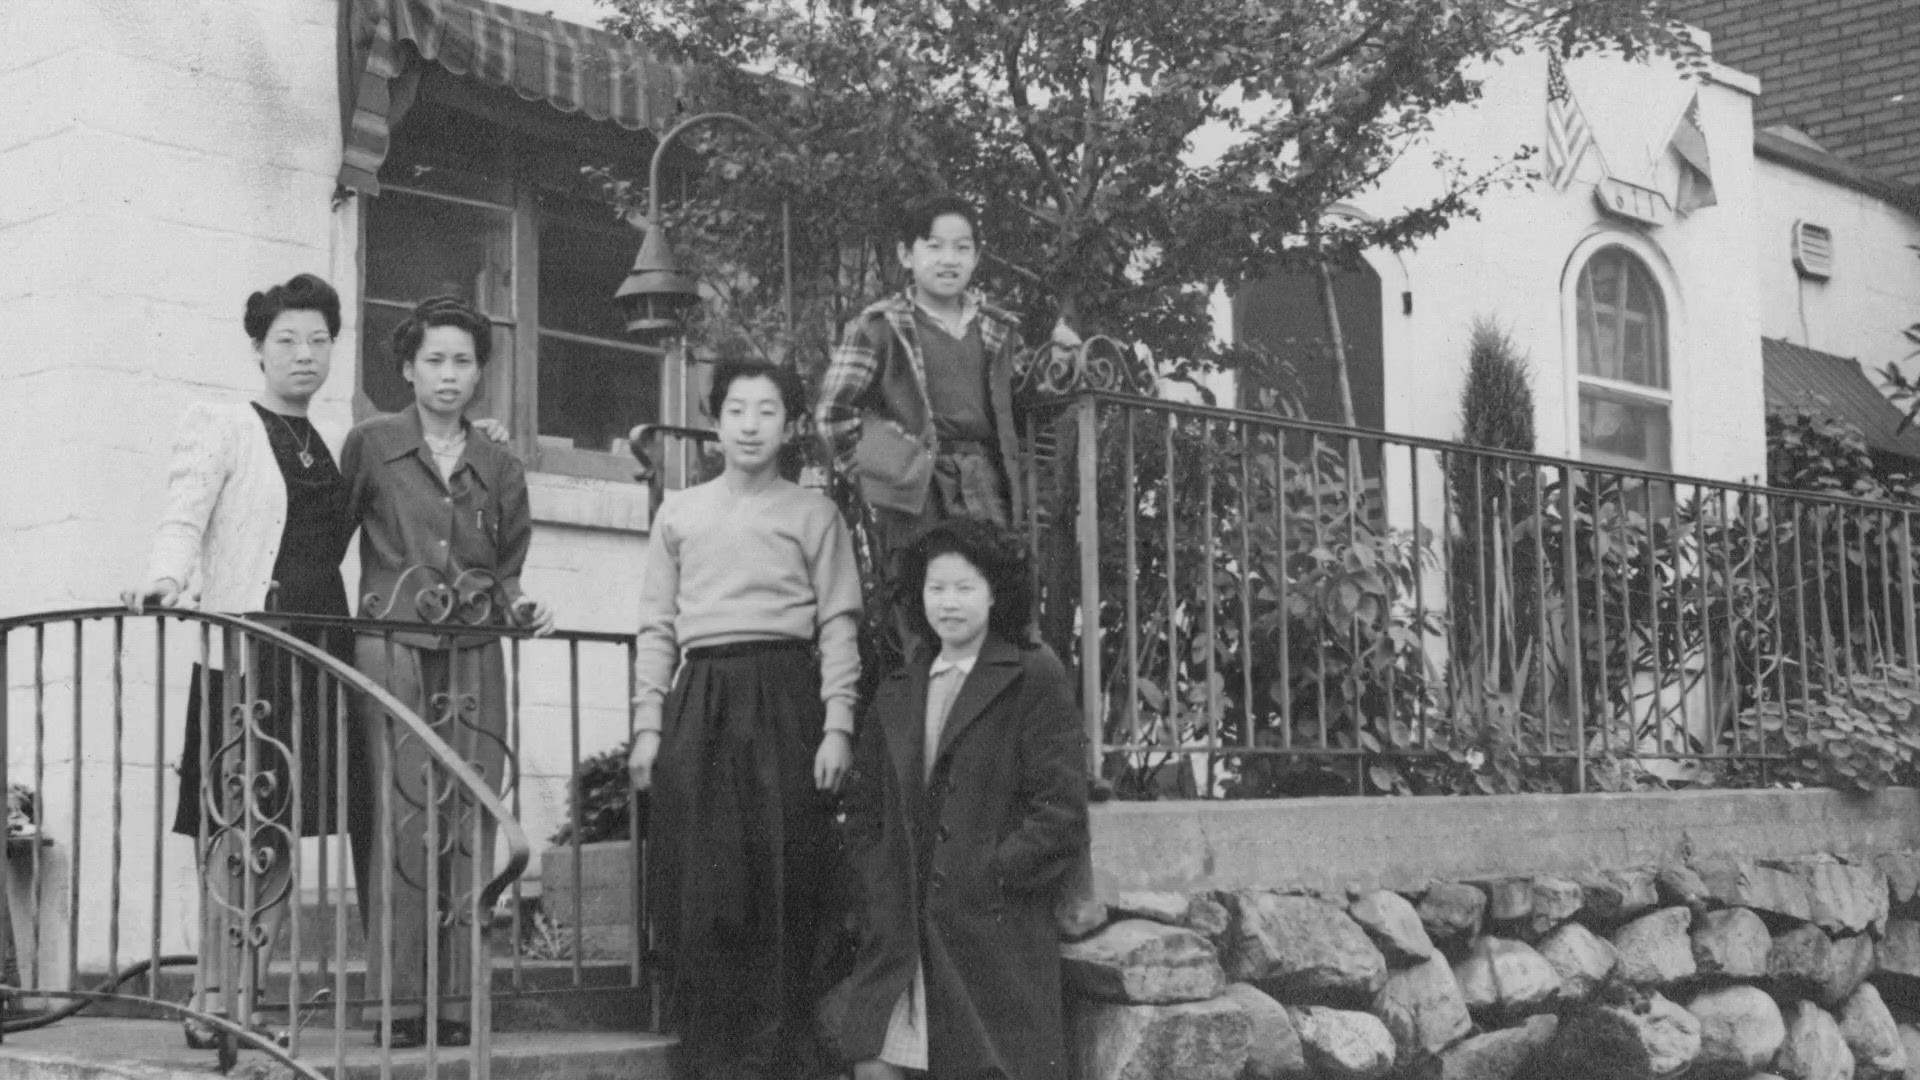 The museum will take over one of the last remaining single-family homes in Seattle's Chinatown International District.